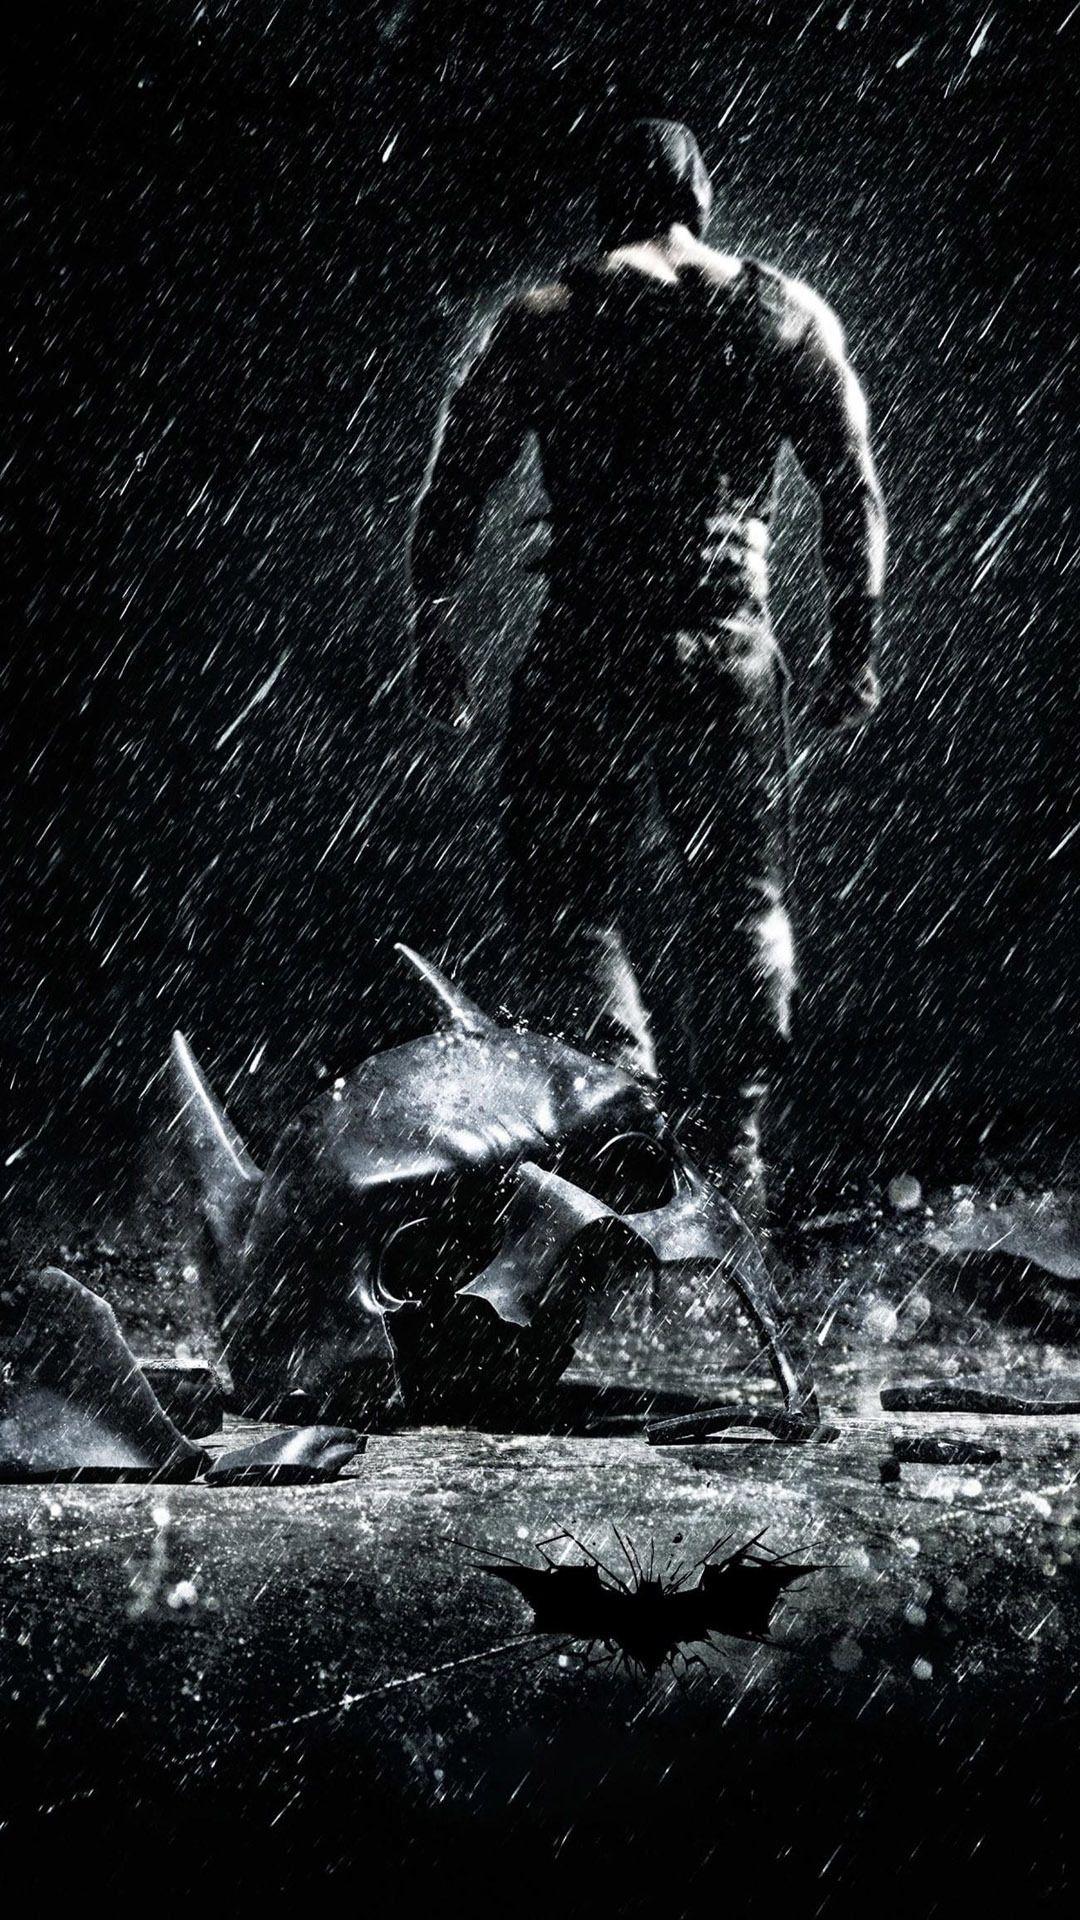 1080x1920 Simple Batman Wallpapers From Hd Wallpaper Cave